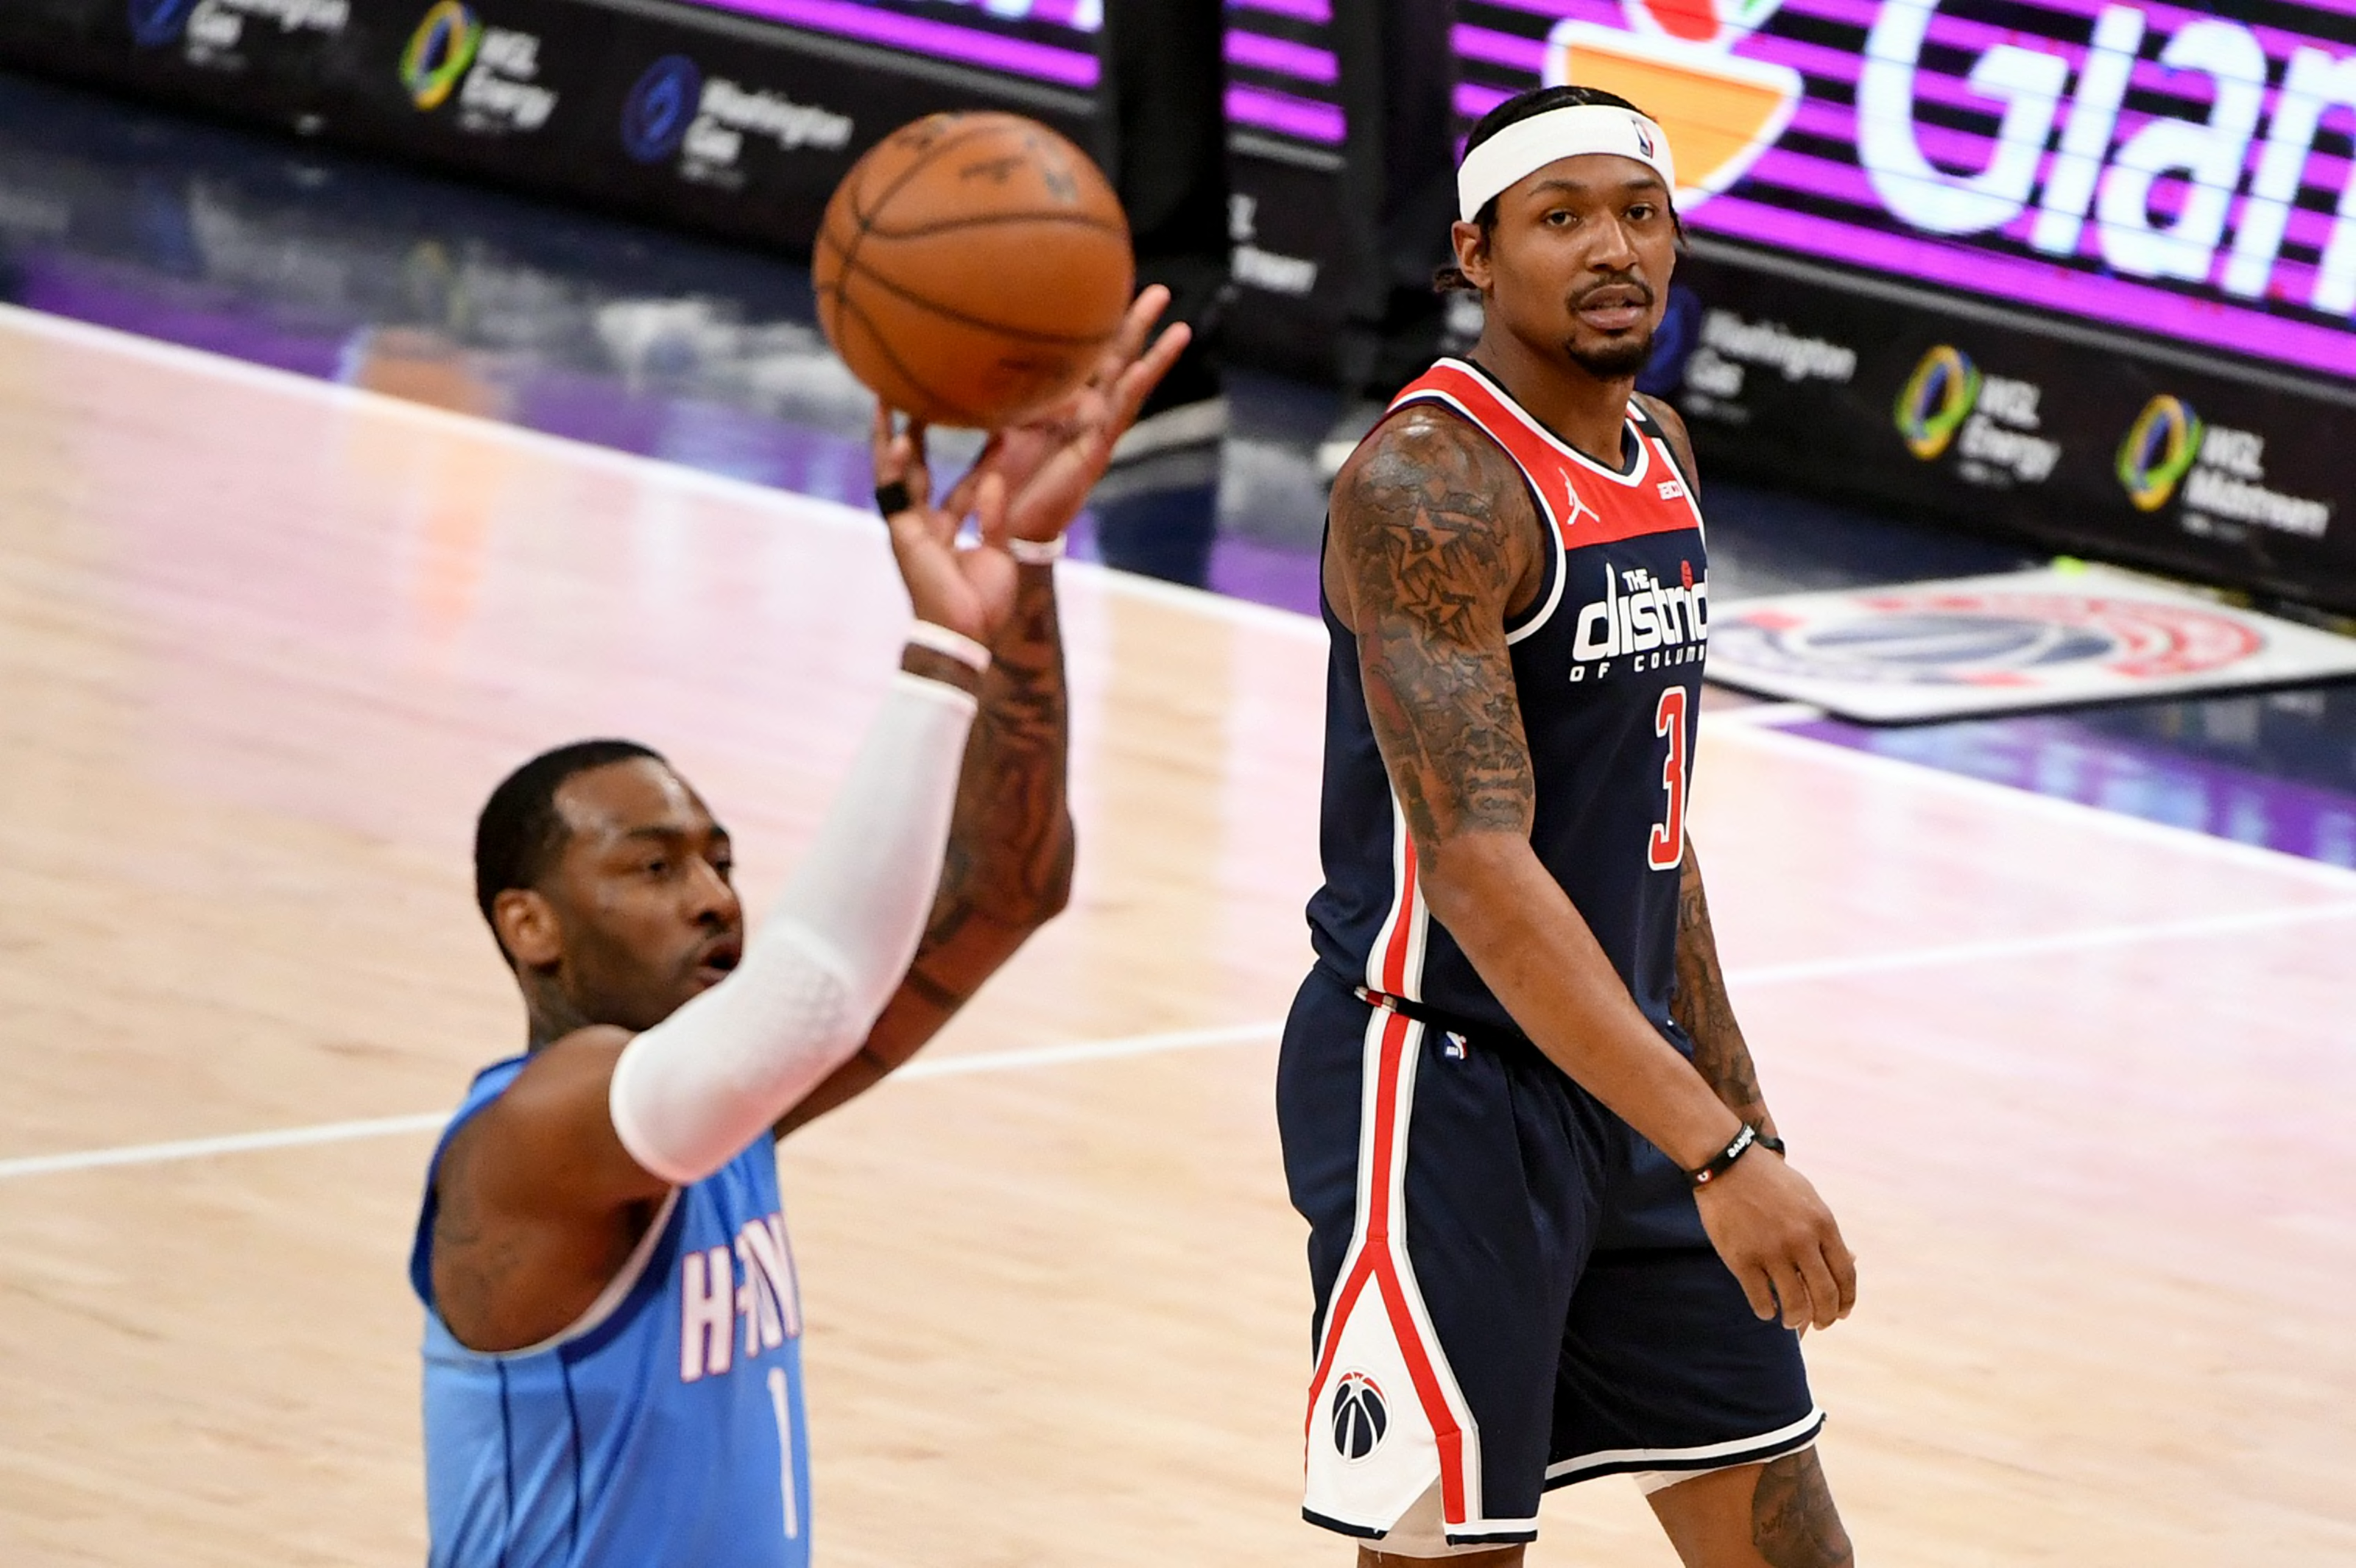 Open Court - In John Wall and Demarcus Cousins' first